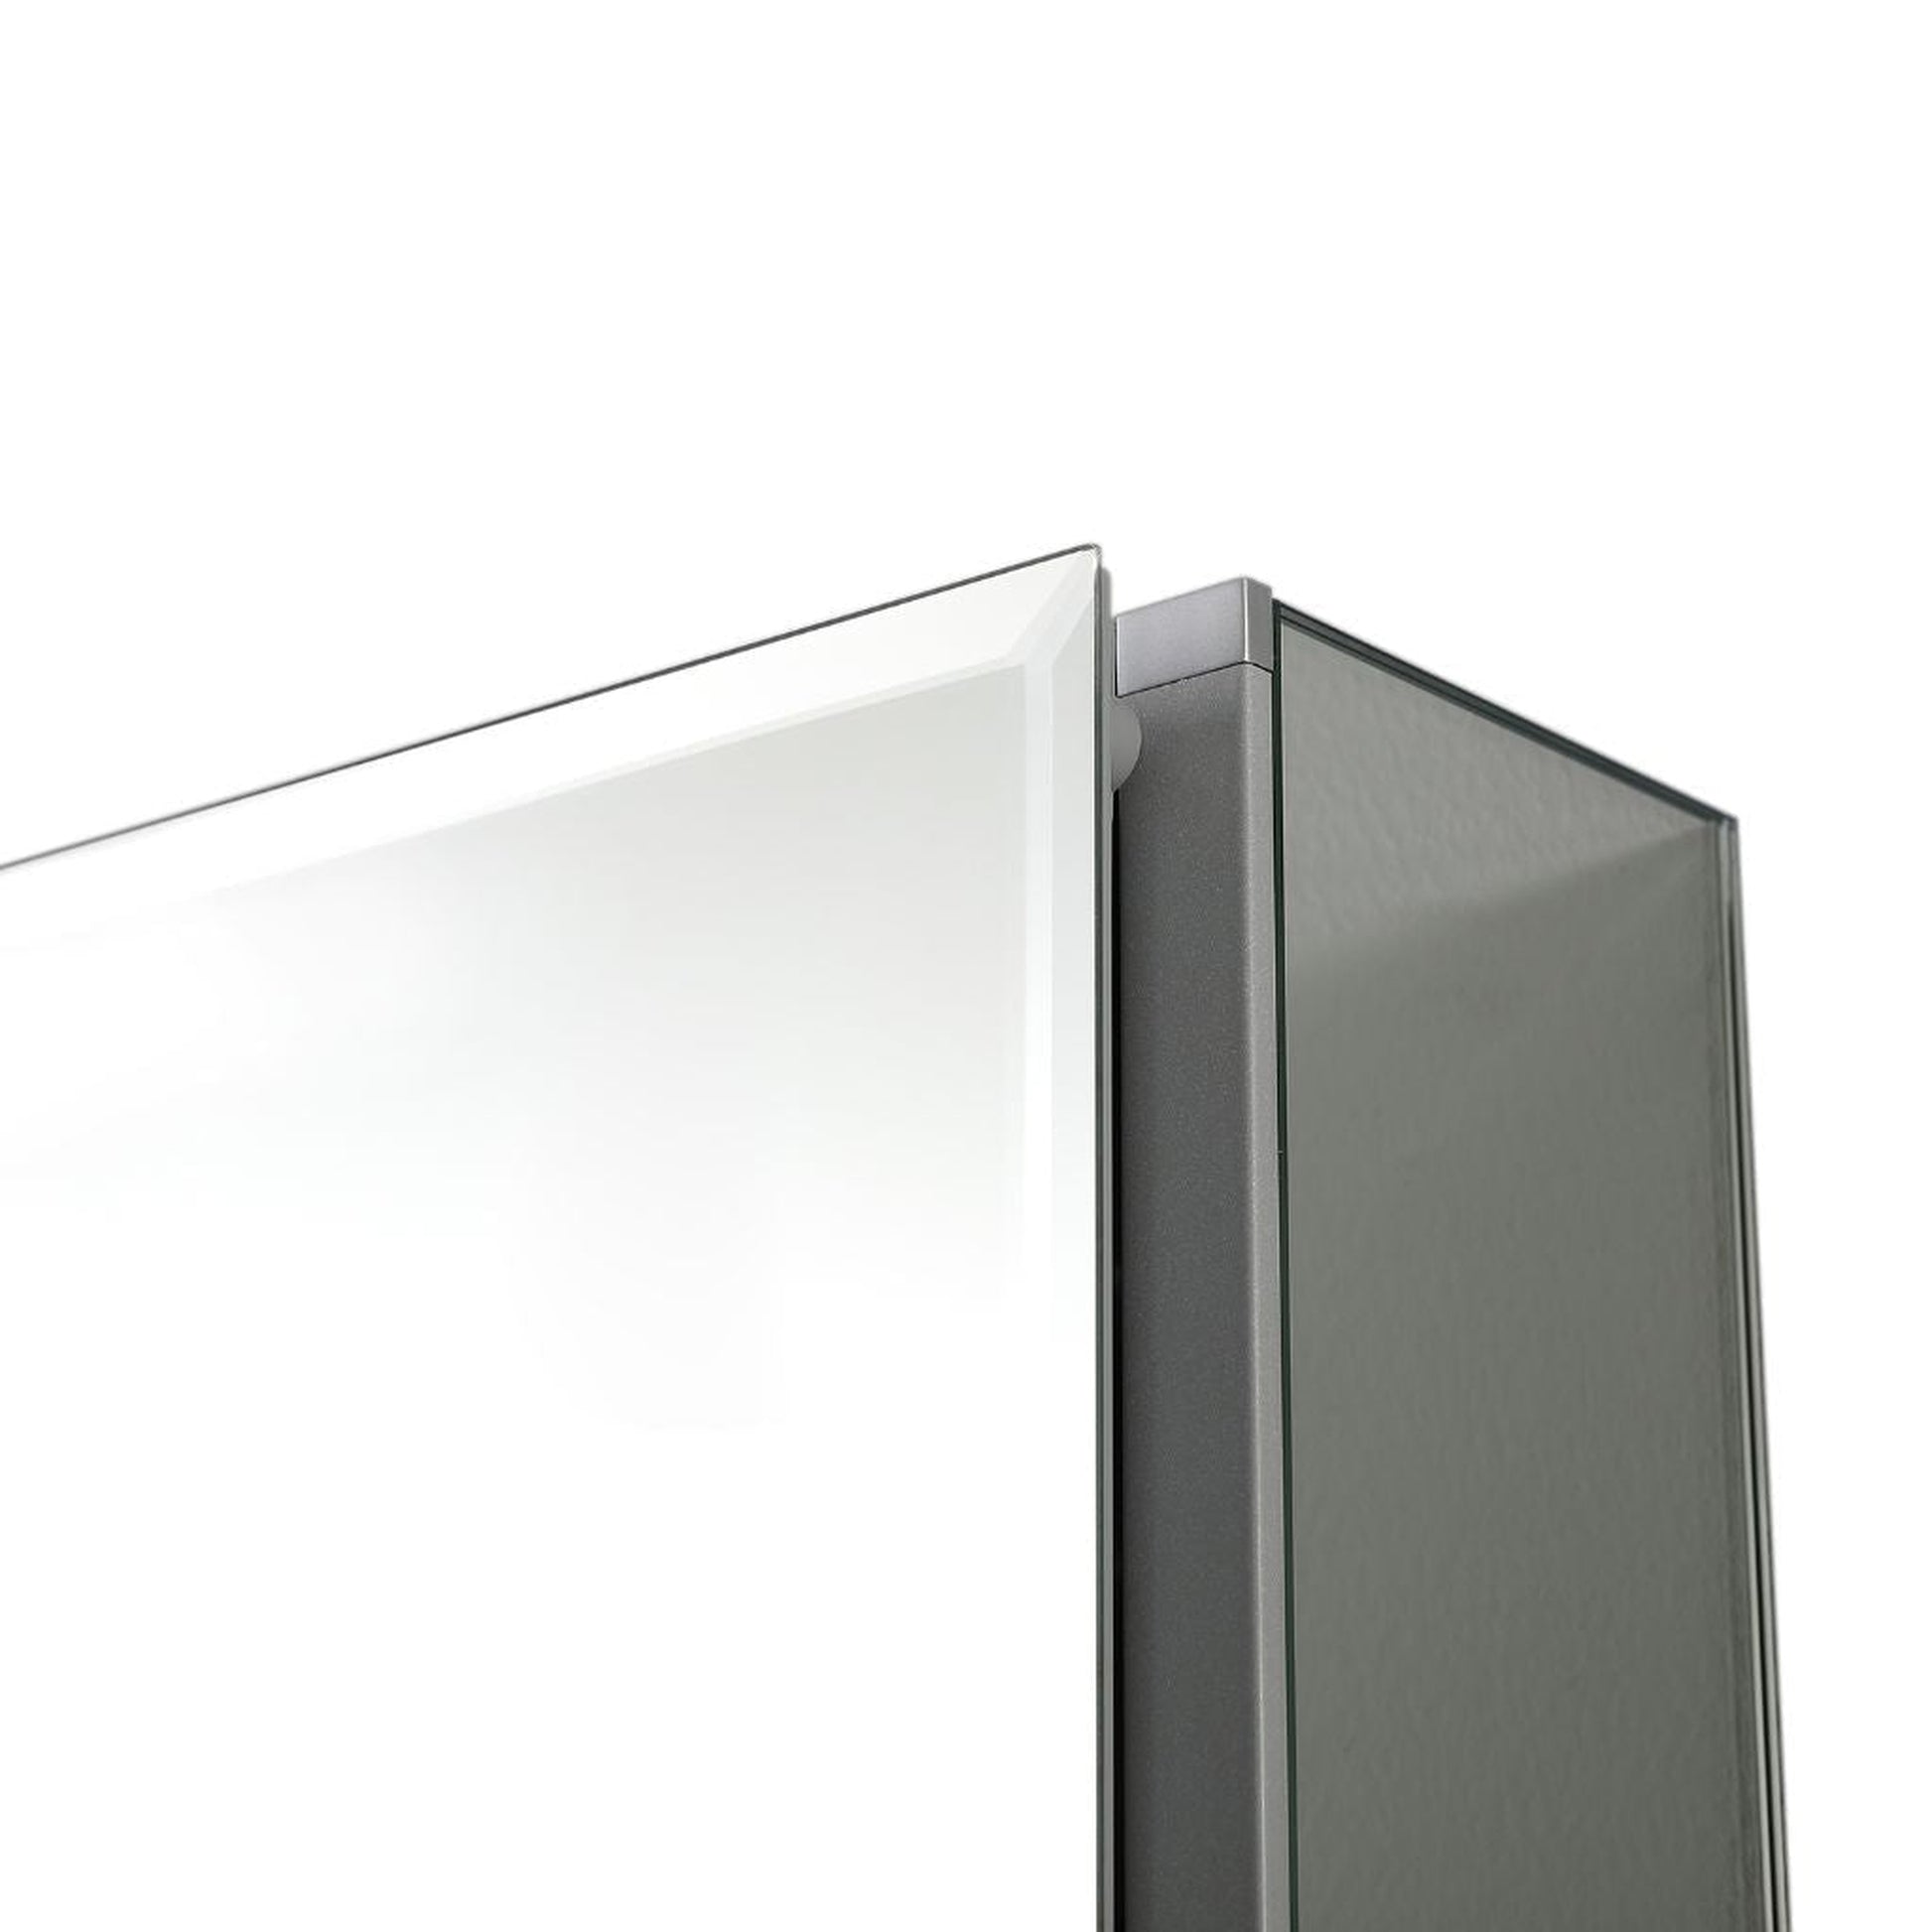 Blossom MC8 20" x 26" Recessed or Surface Mount Left or Right-Hand Swing Door Aluminum Medicine Cabinet With Mirror, Adjustable Hinges and Adjustable Glass Shelves